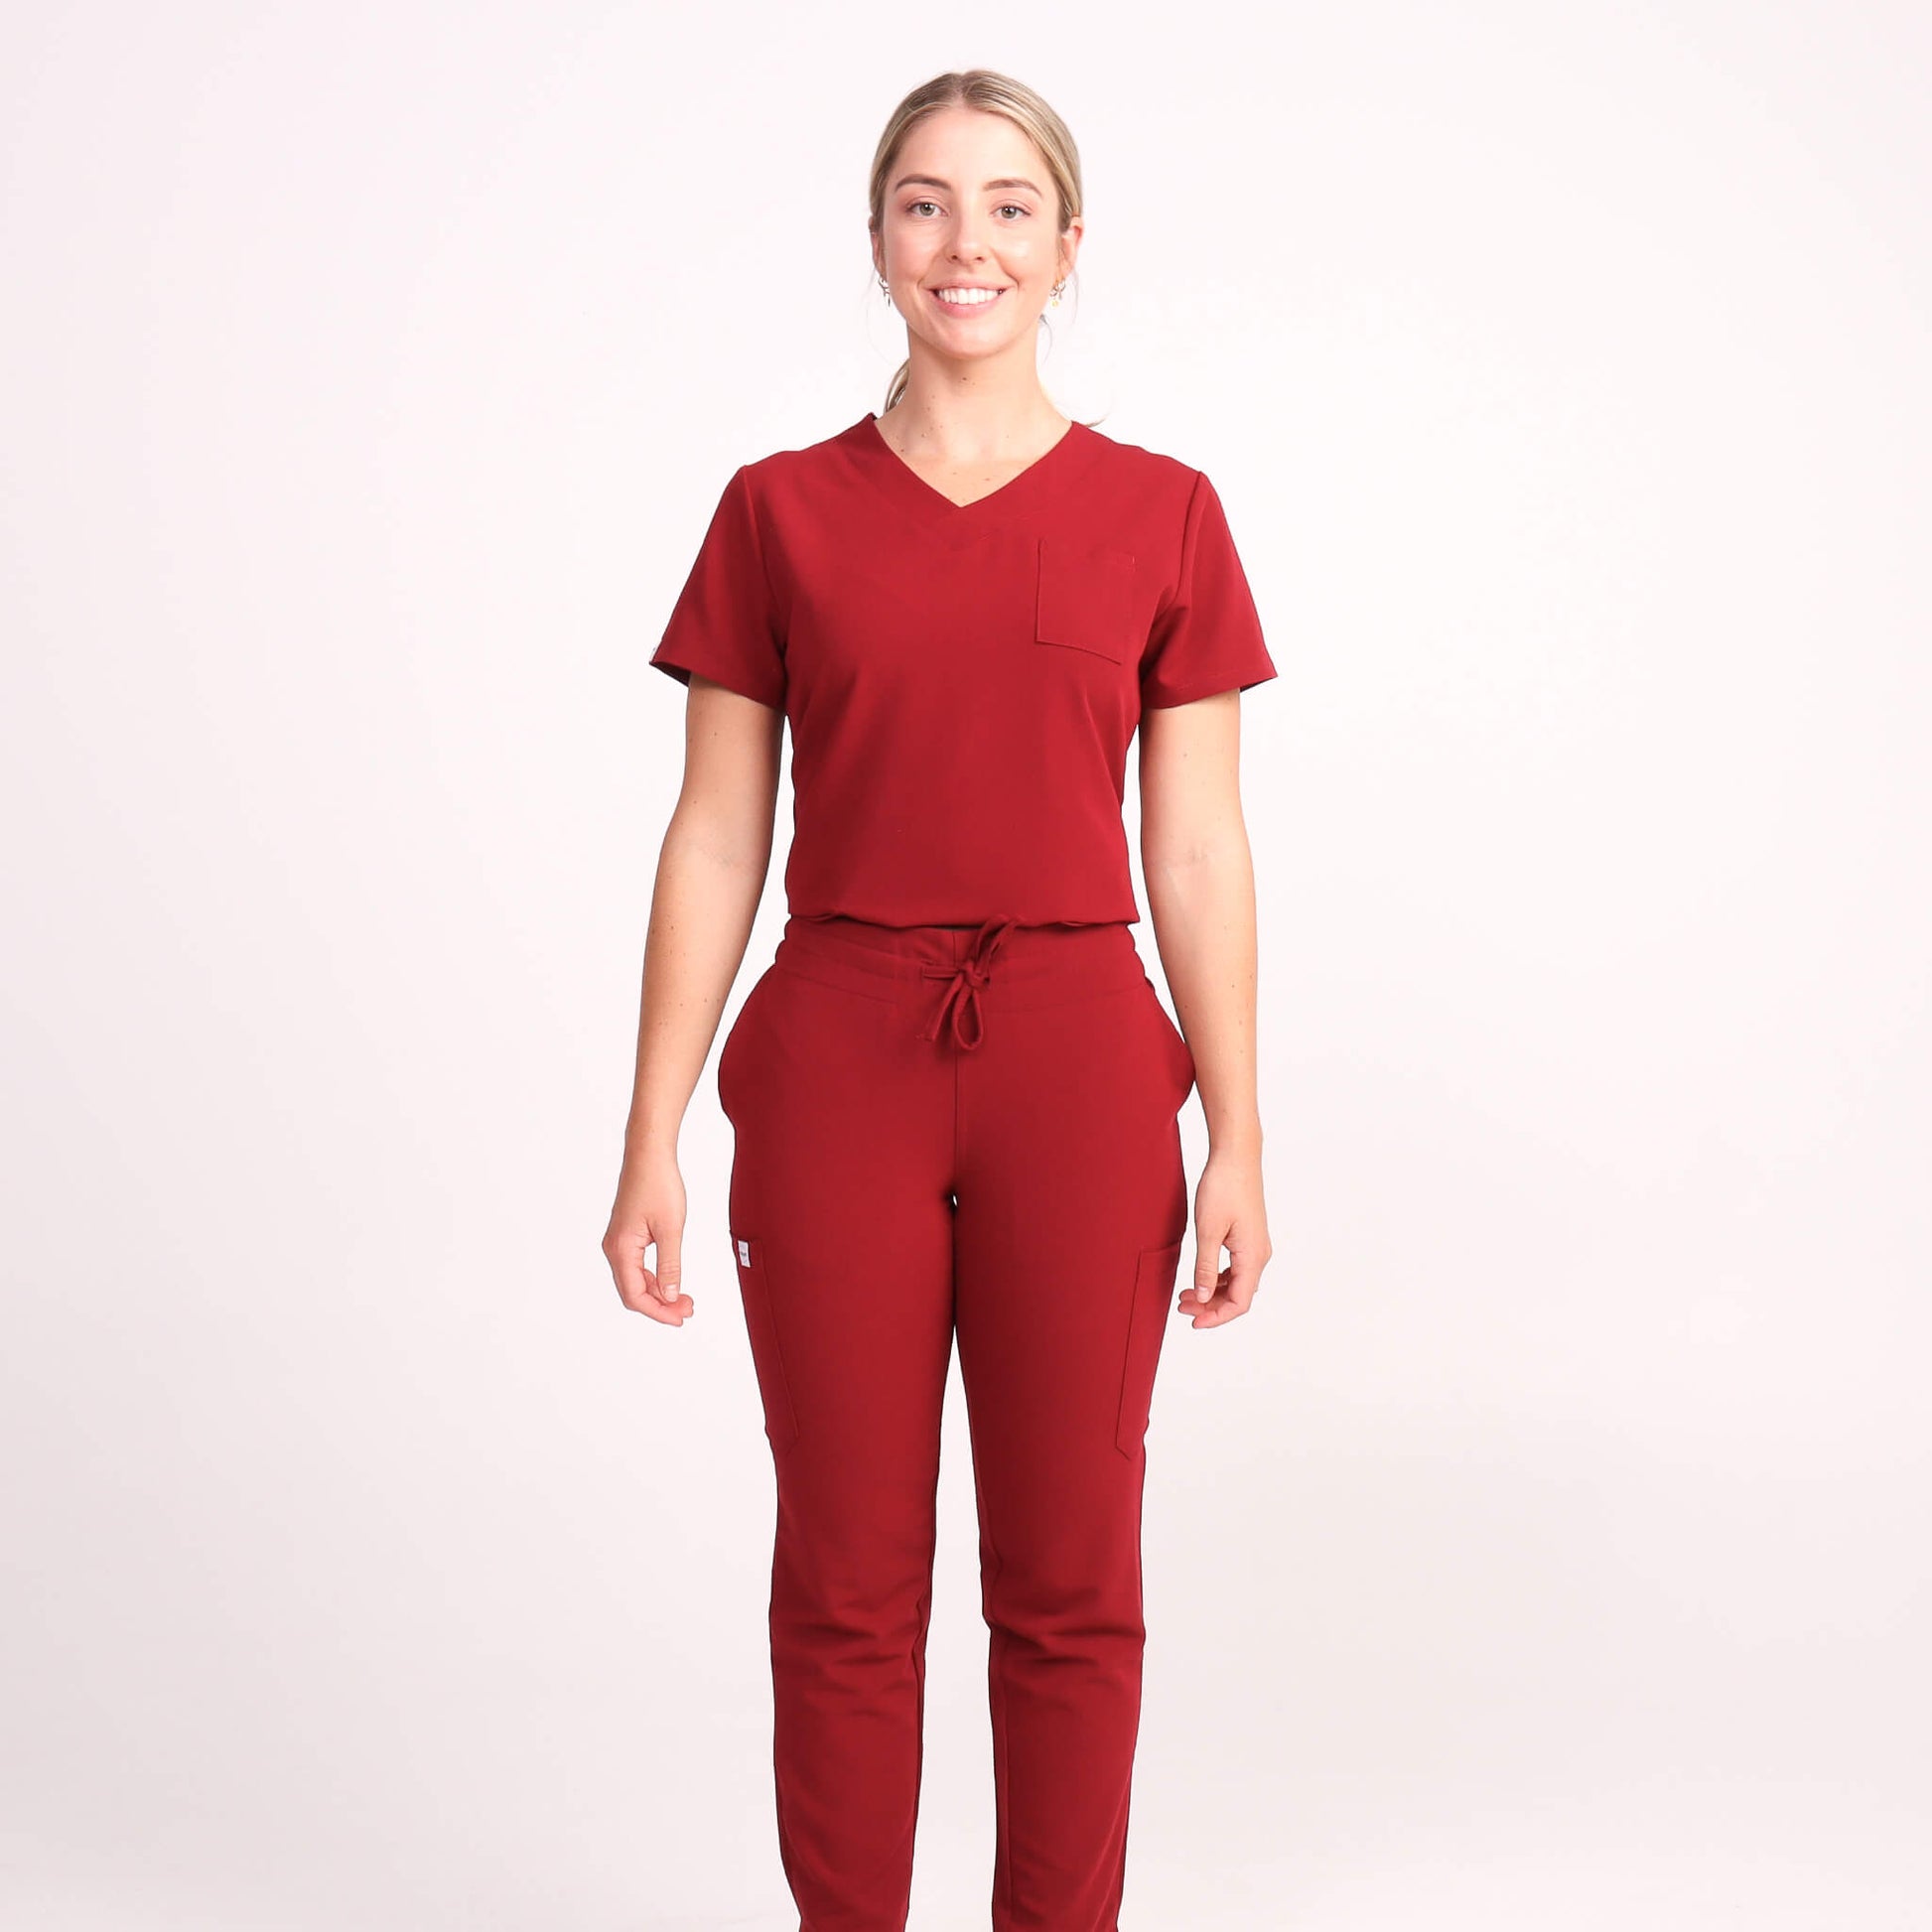 Nurse wearing Burgundy Medical Scrub Set by Fit Right Medical Scrubs. Available online near you today.